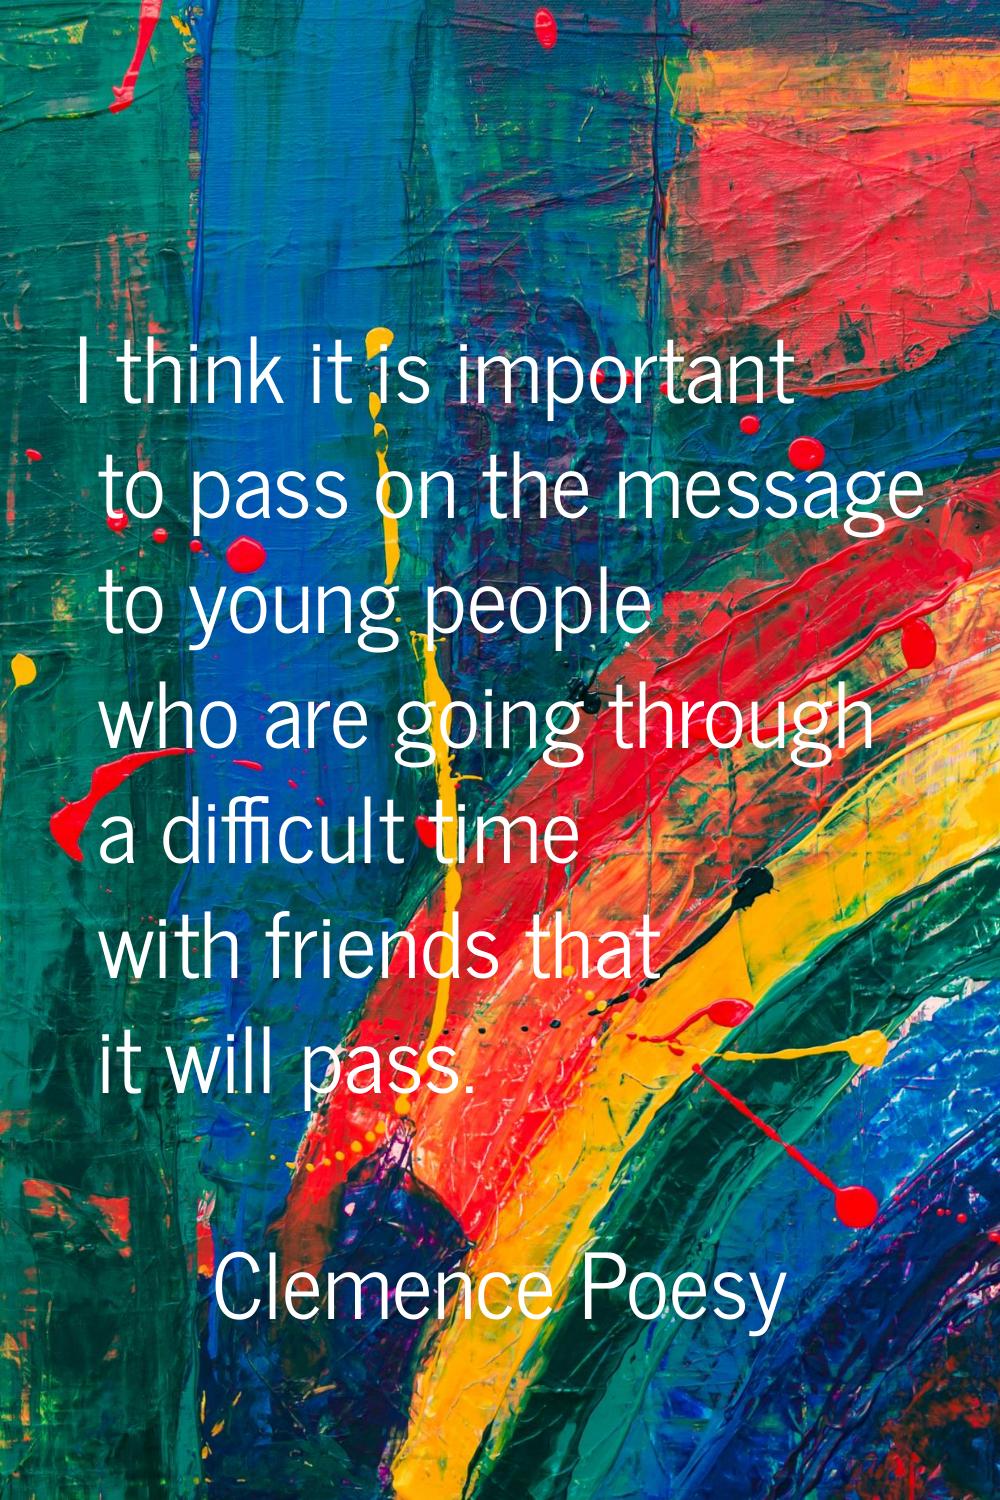 I think it is important to pass on the message to young people who are going through a difficult ti